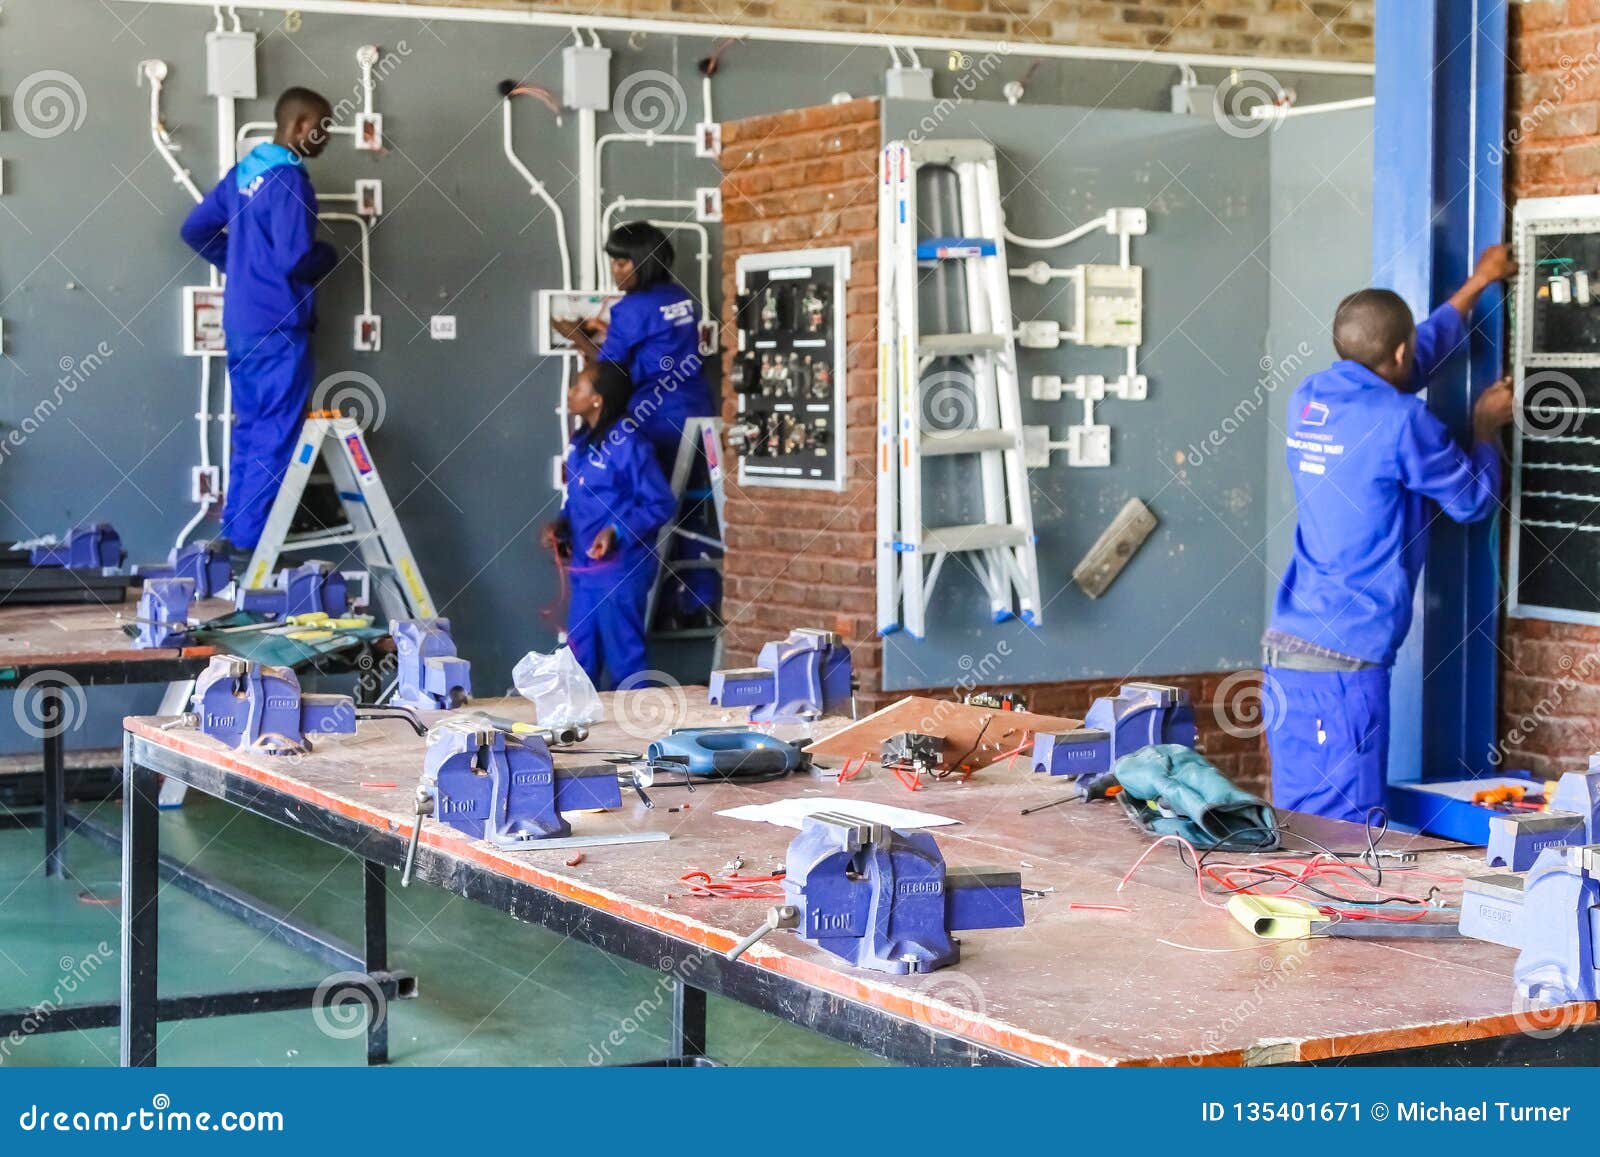 Technical training officer jobs south africa